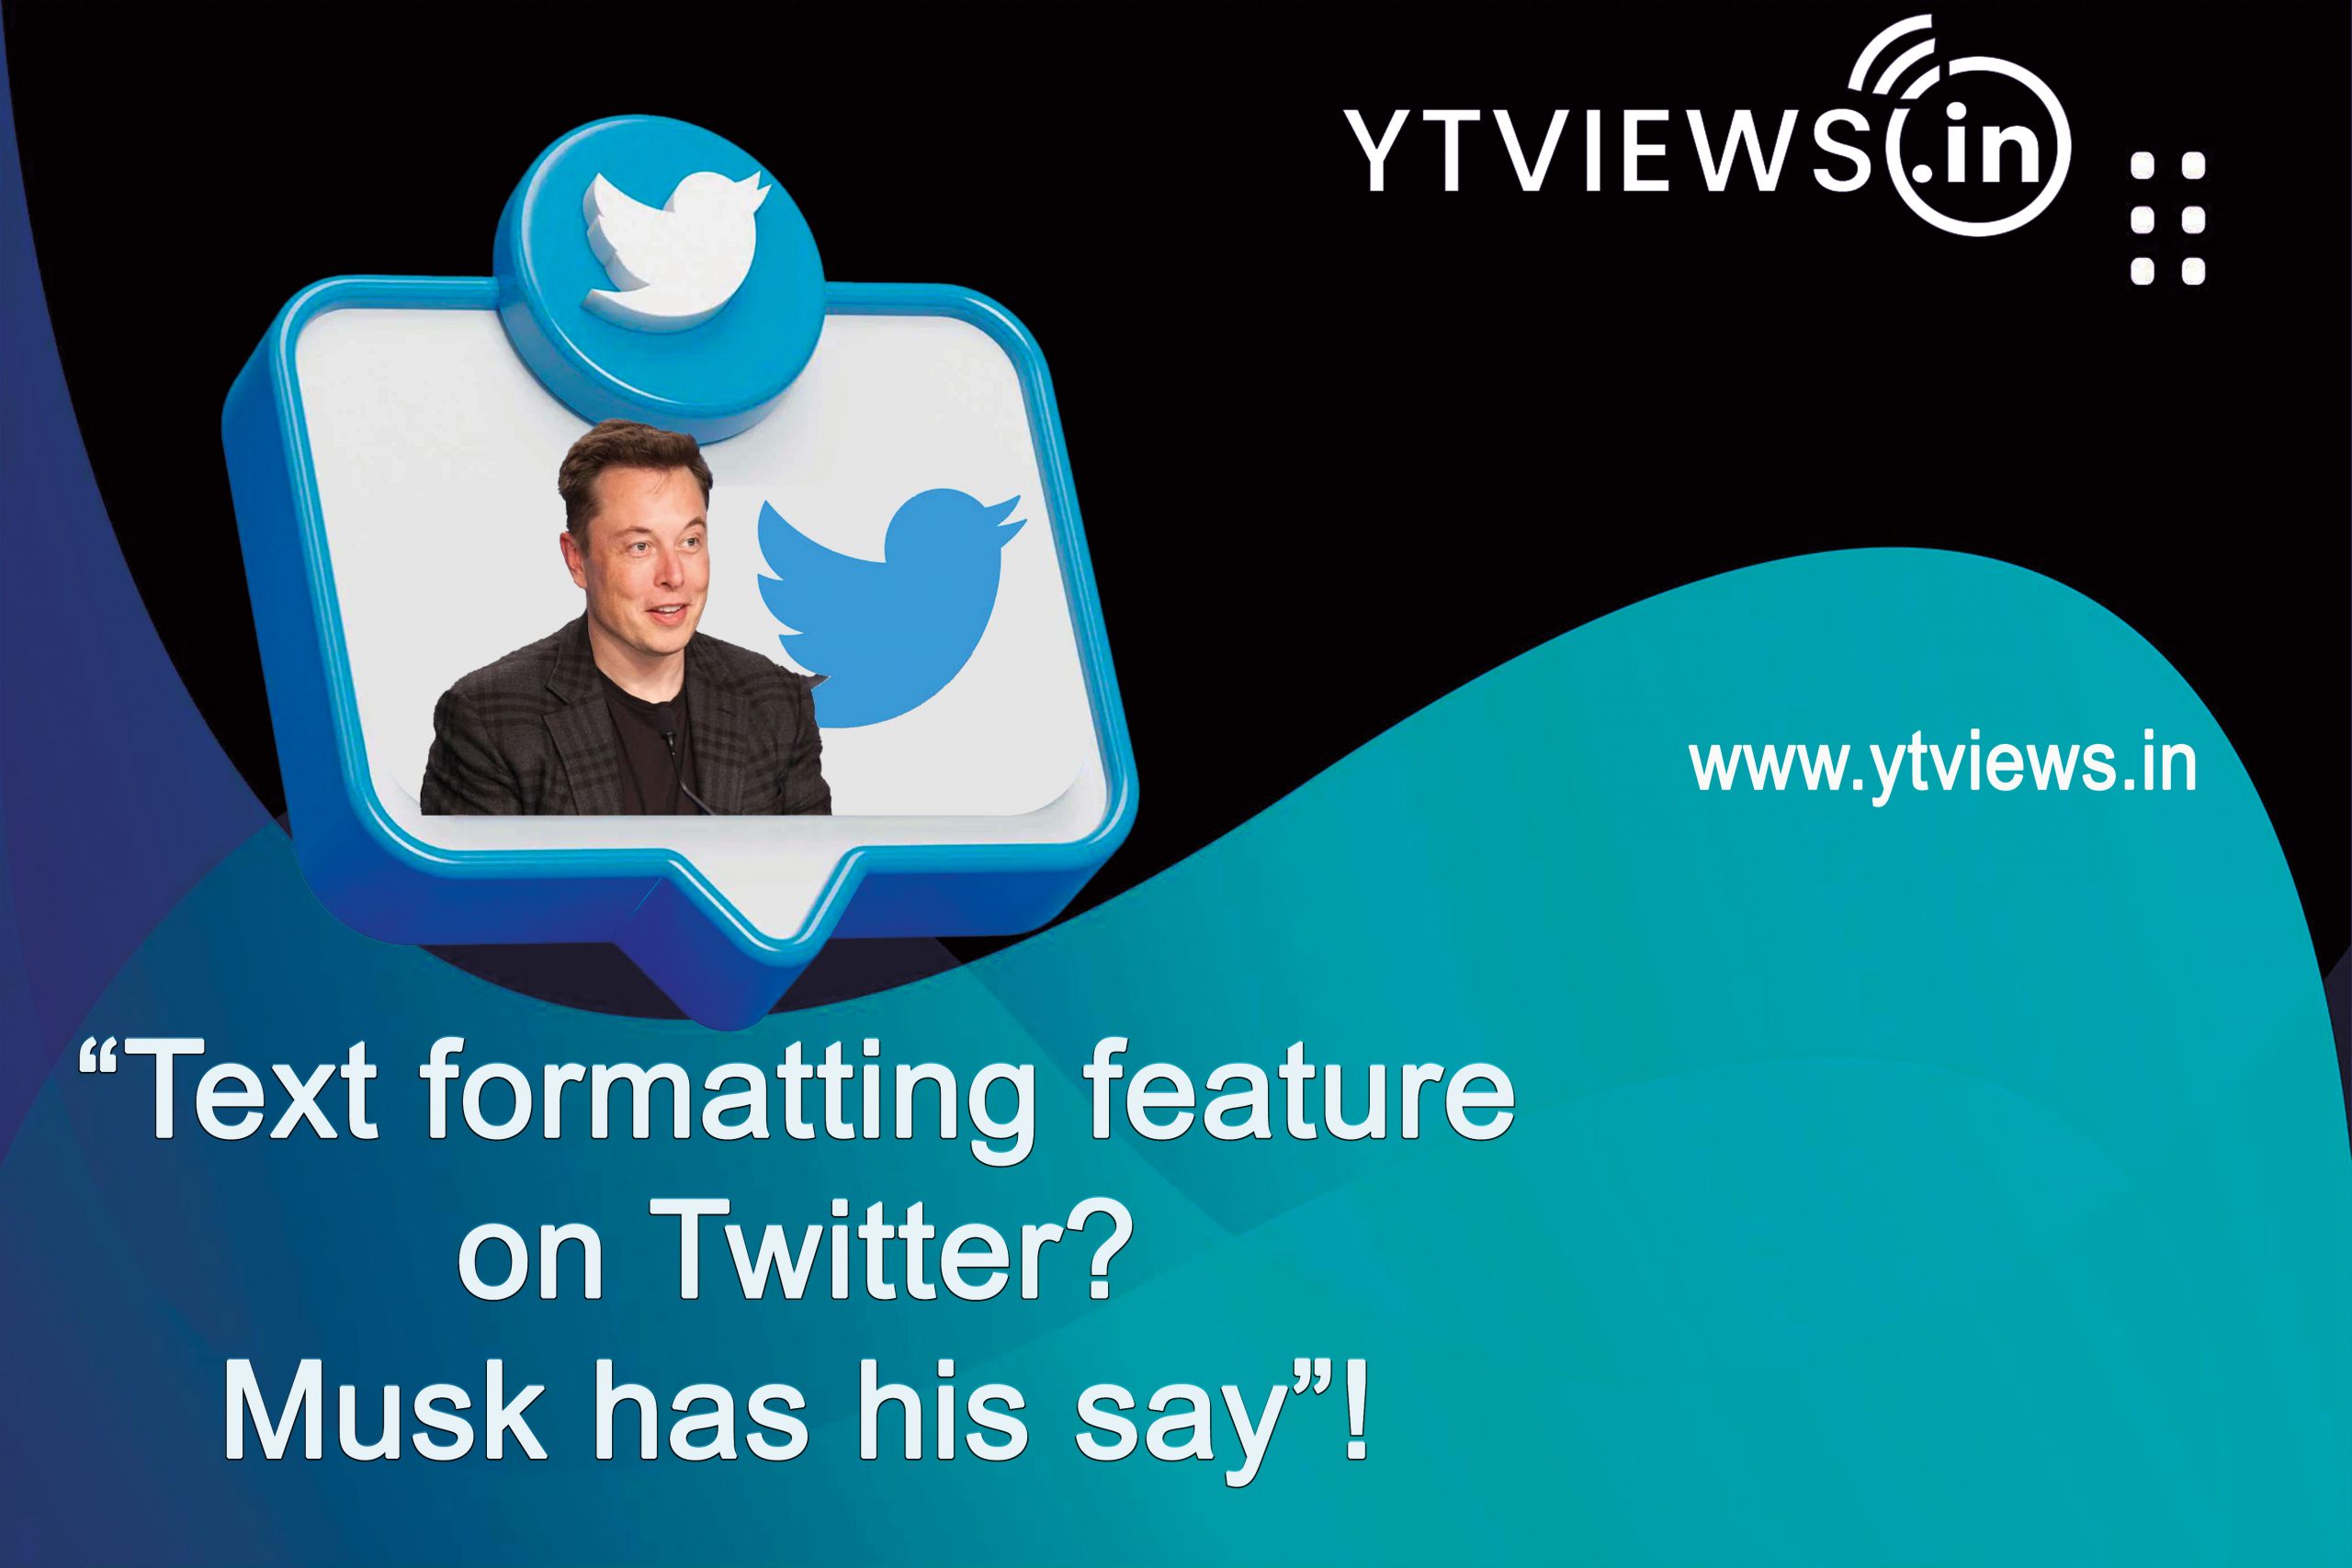 Text-formatting feature on Twitter? Musk has his say